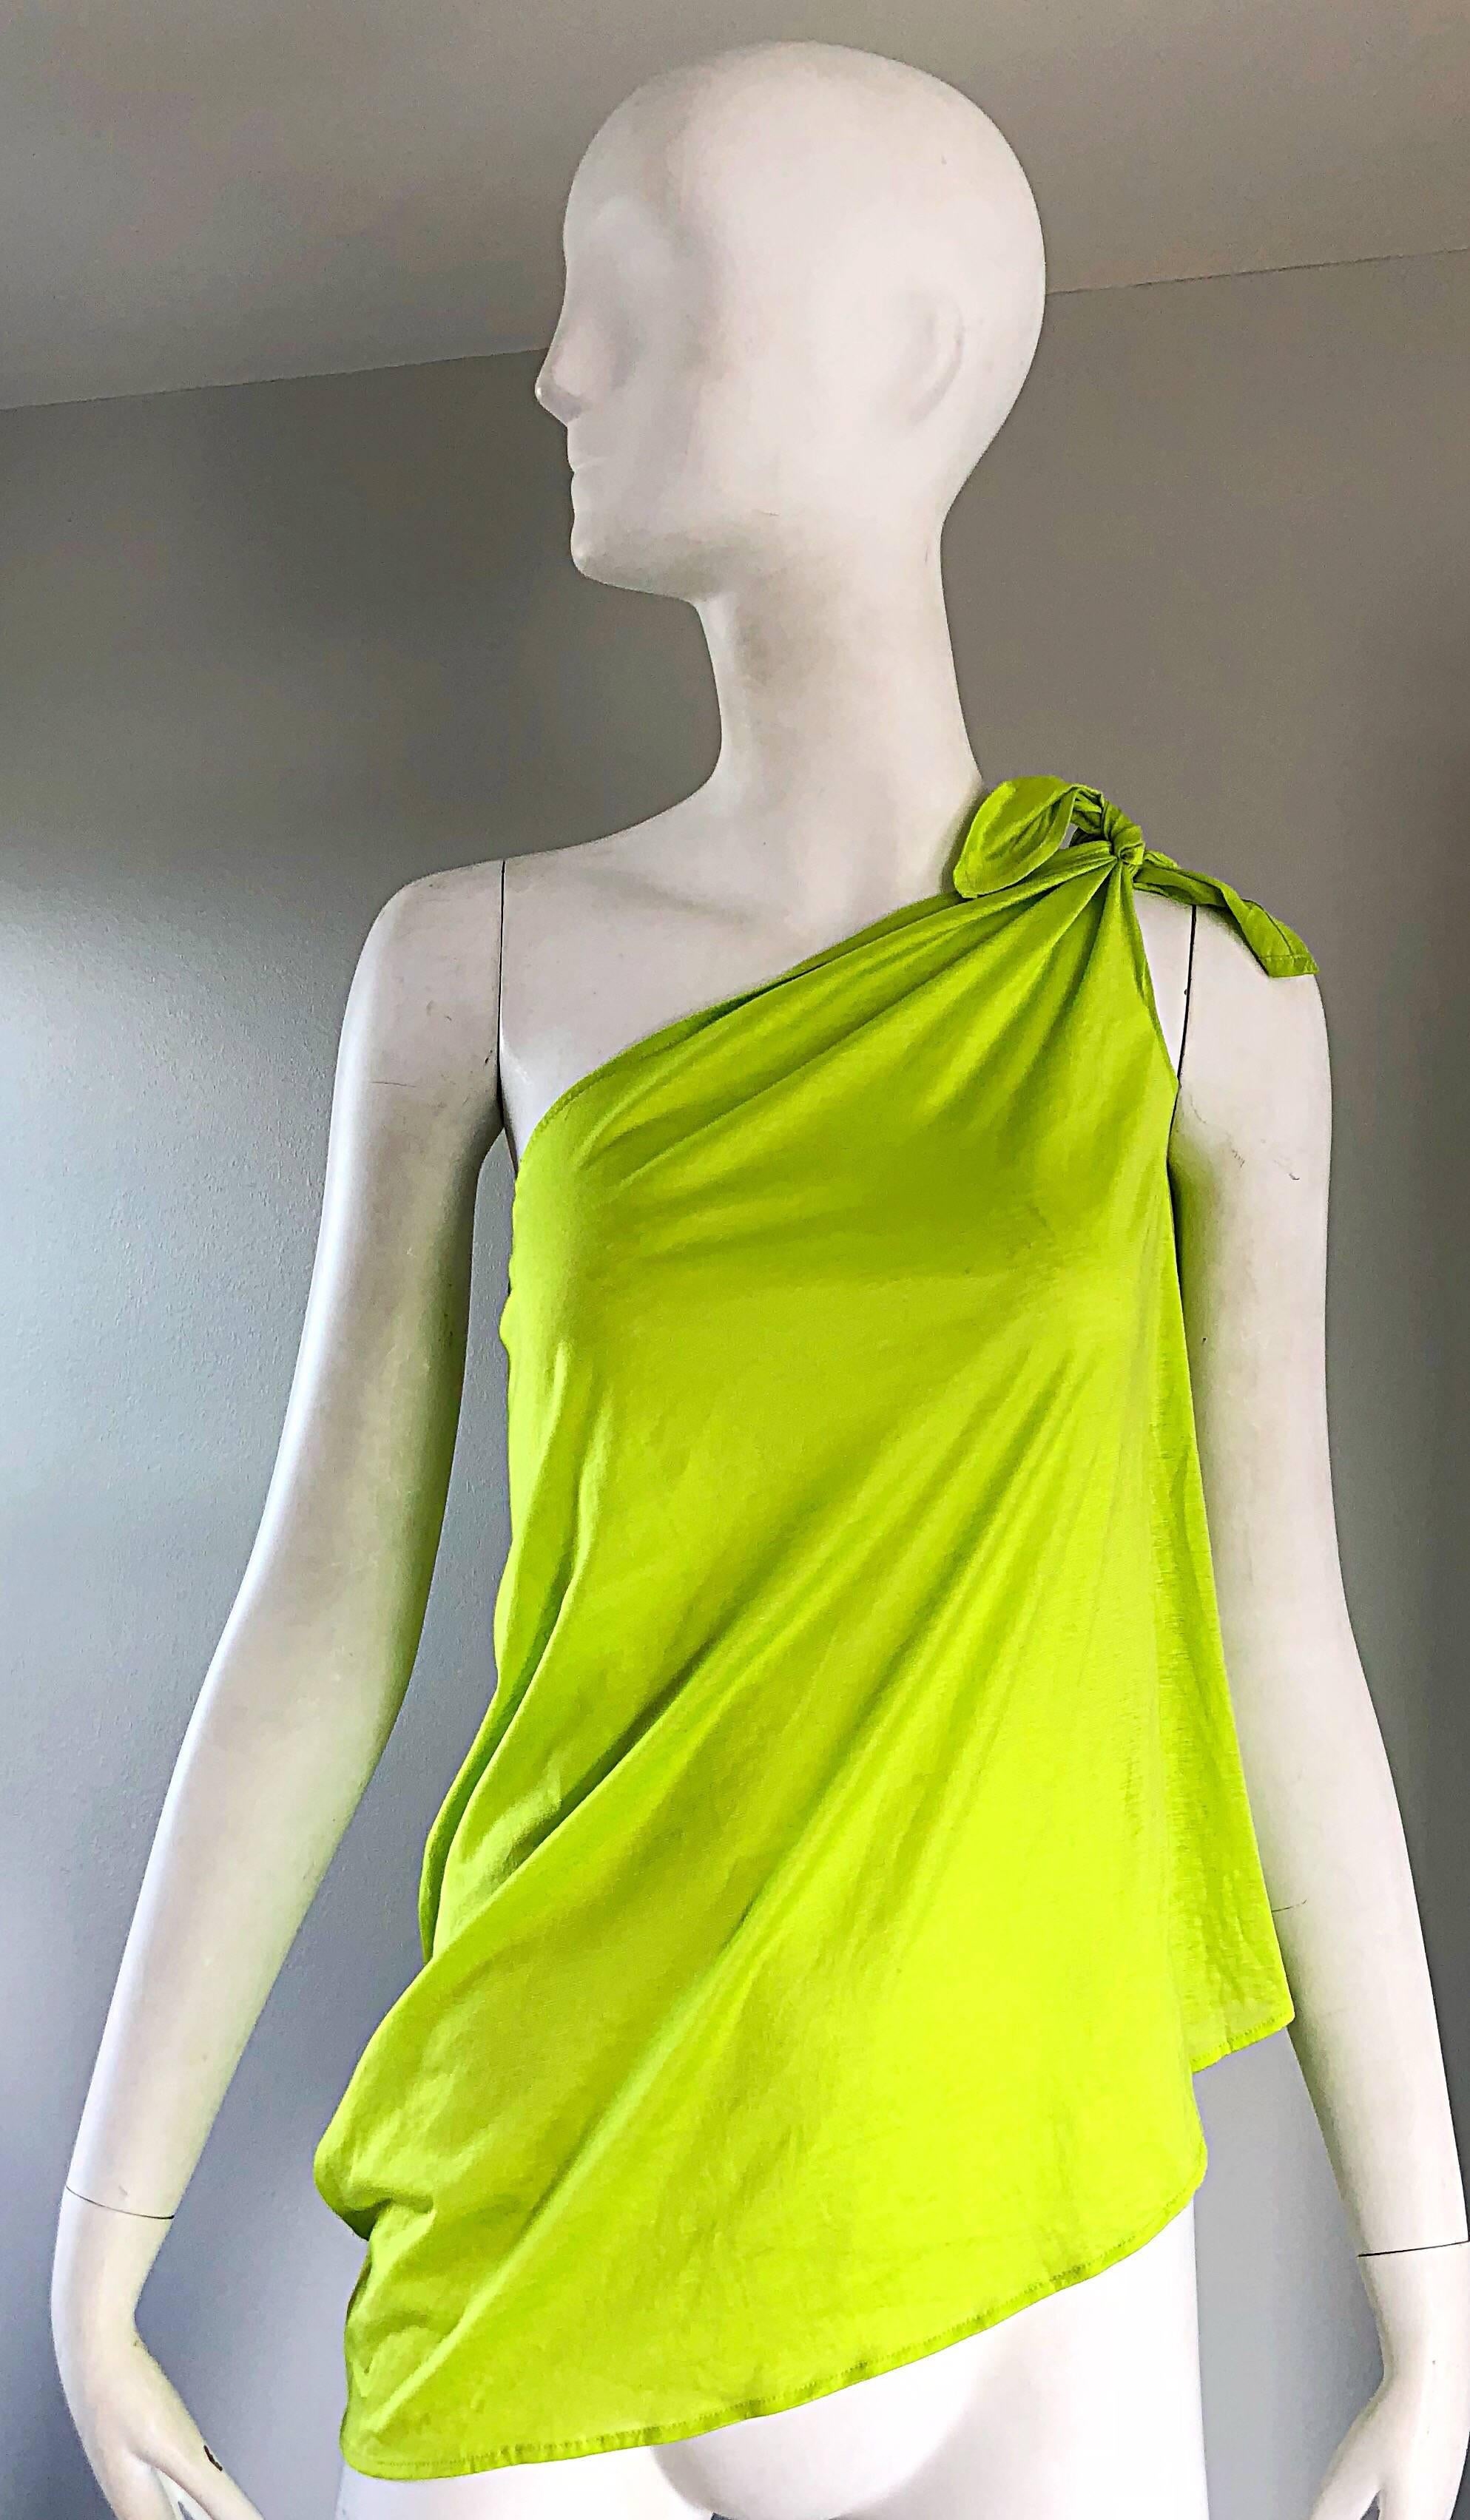 Chic vintage 90s ERES one shoulder lime neon green one shoulder lightweight top! Simply ties at the left shoulder to control size. Lightweight breezy cotton fabric looks great alone orbelted. Pair with shorts, pants jeans, or a skirt. In great